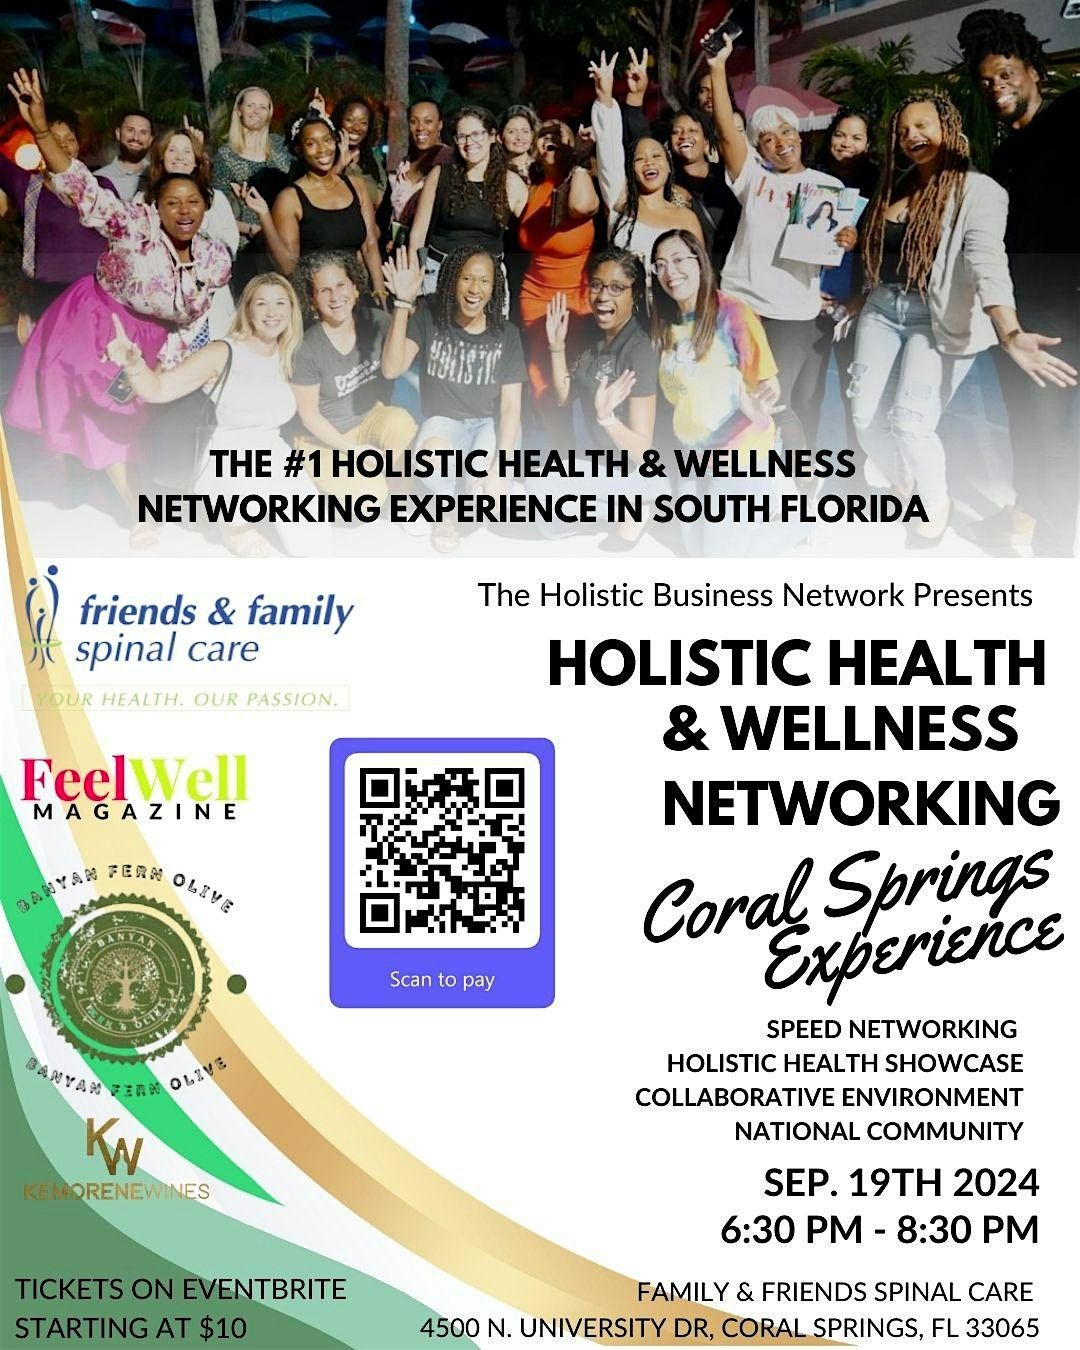 Holistic Health & Wellness Networking Experience Coral Springs